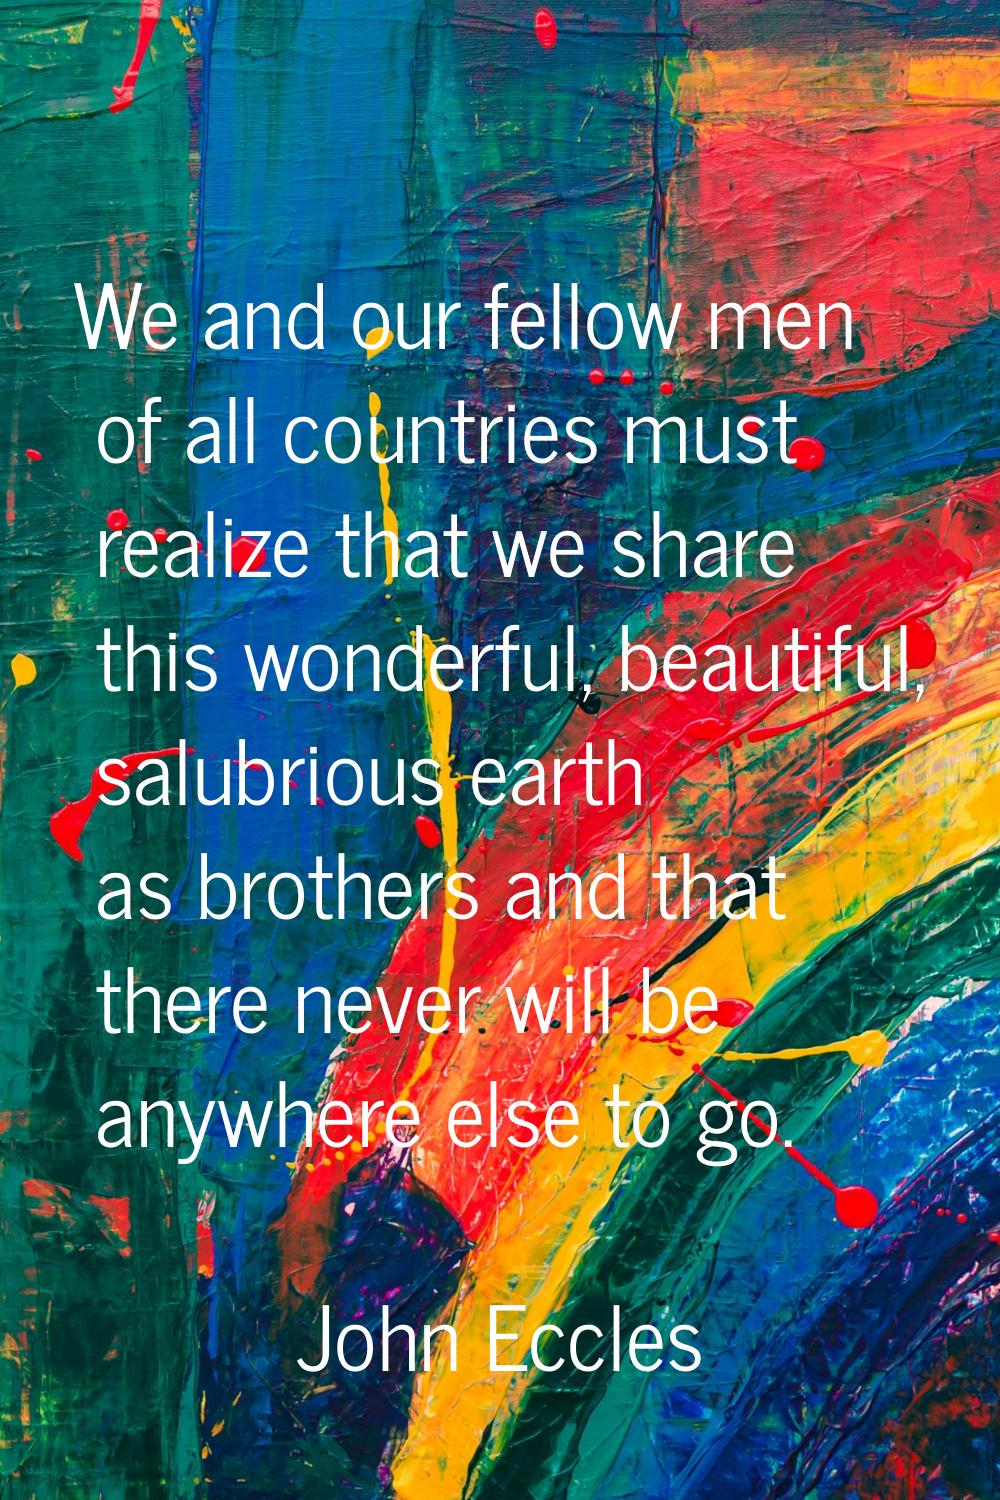 We and our fellow men of all countries must realize that we share this wonderful, beautiful, salubr